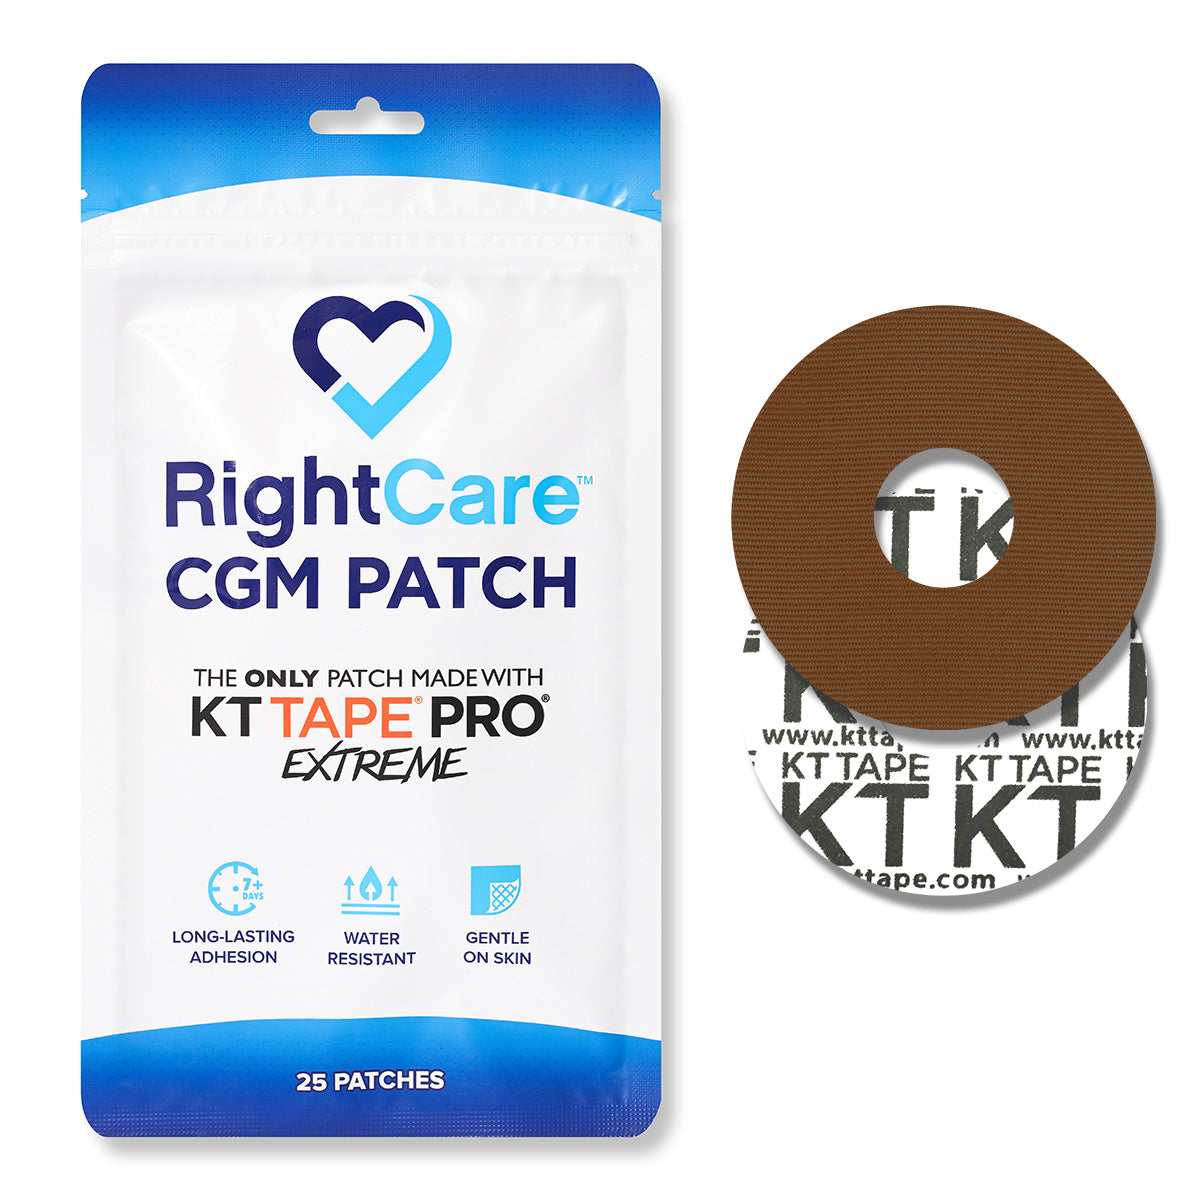 RightCare CGM Adhesive Patch made with KT Tape, Libre, Bag of 25 17191517